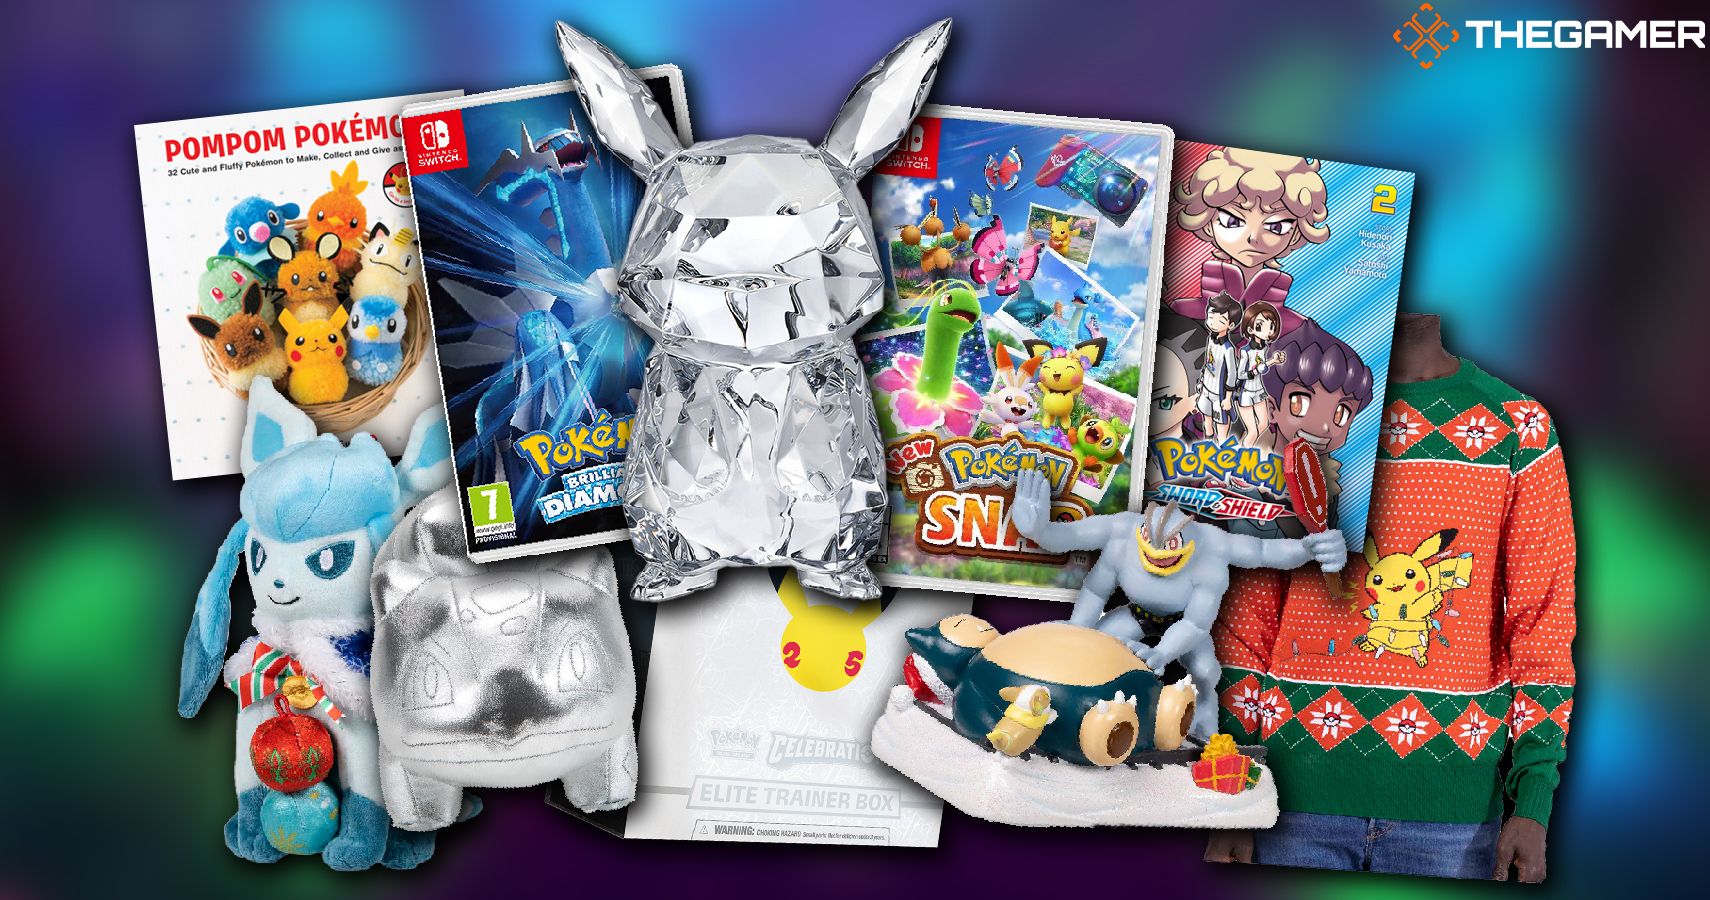 10 Best Holiday Gift Ideas For Pokemon Fans